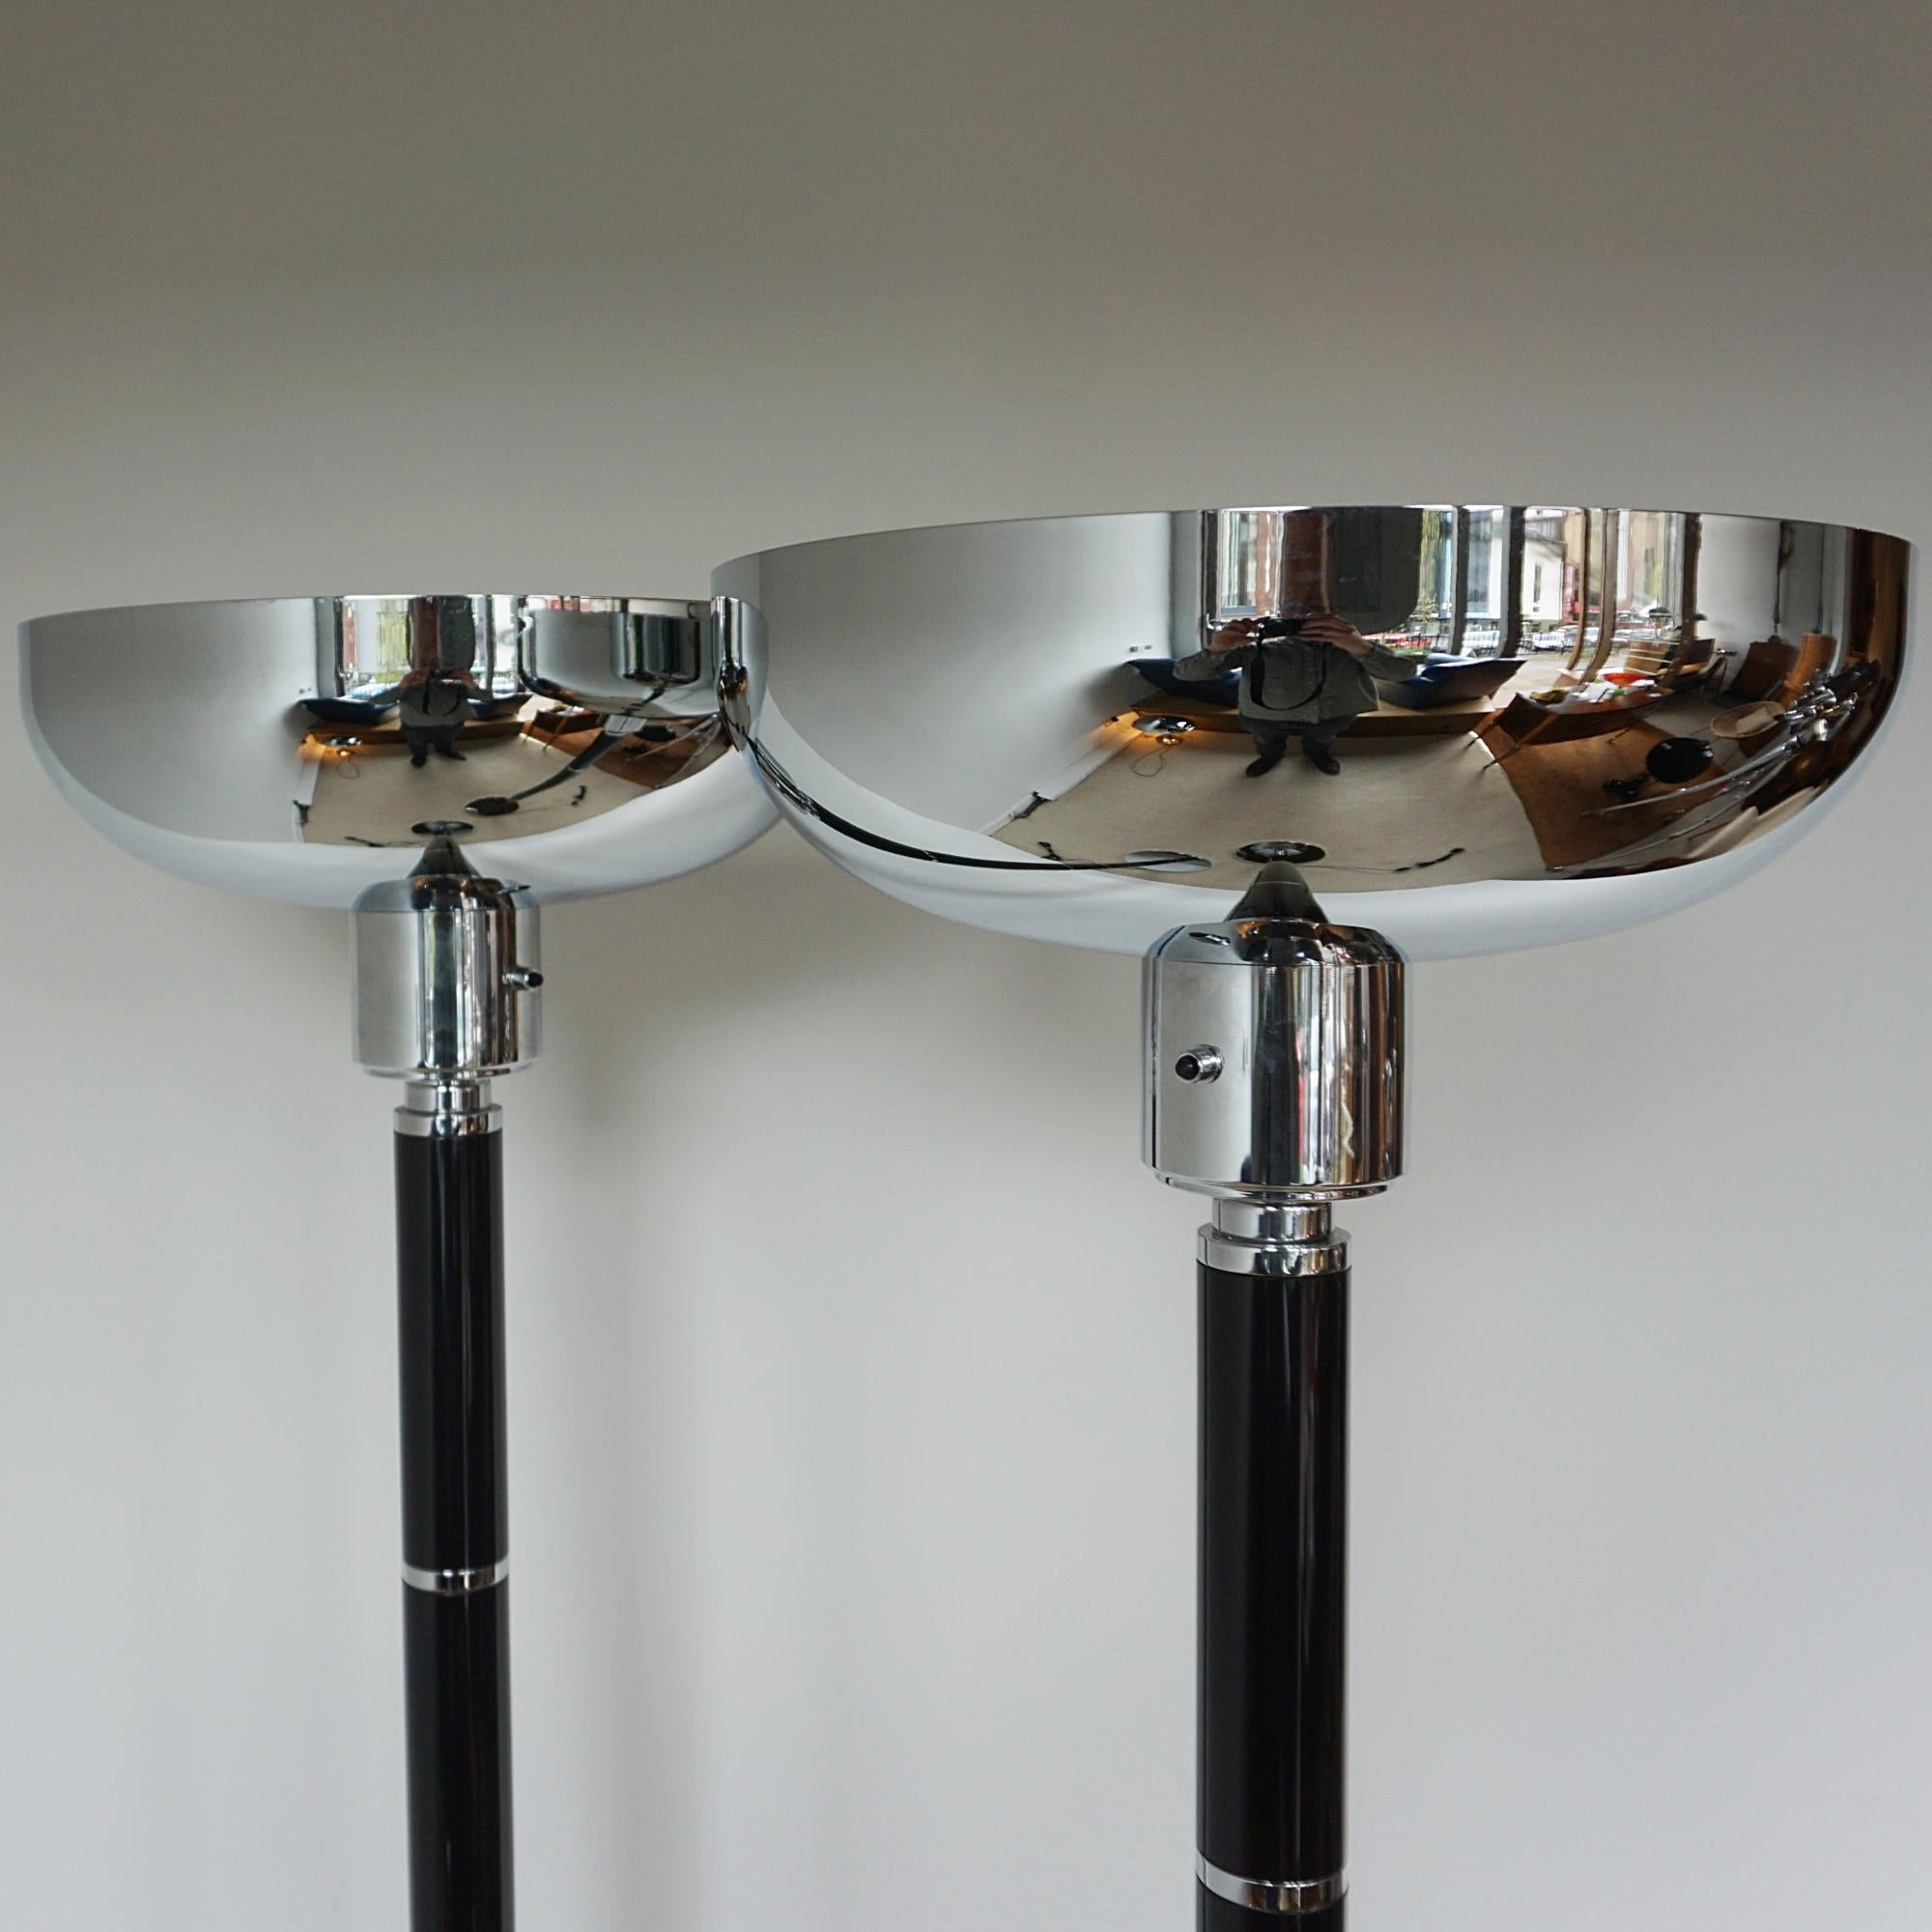 Pair of Art Deco Style Uplighter Floor Lamps  For Sale 1